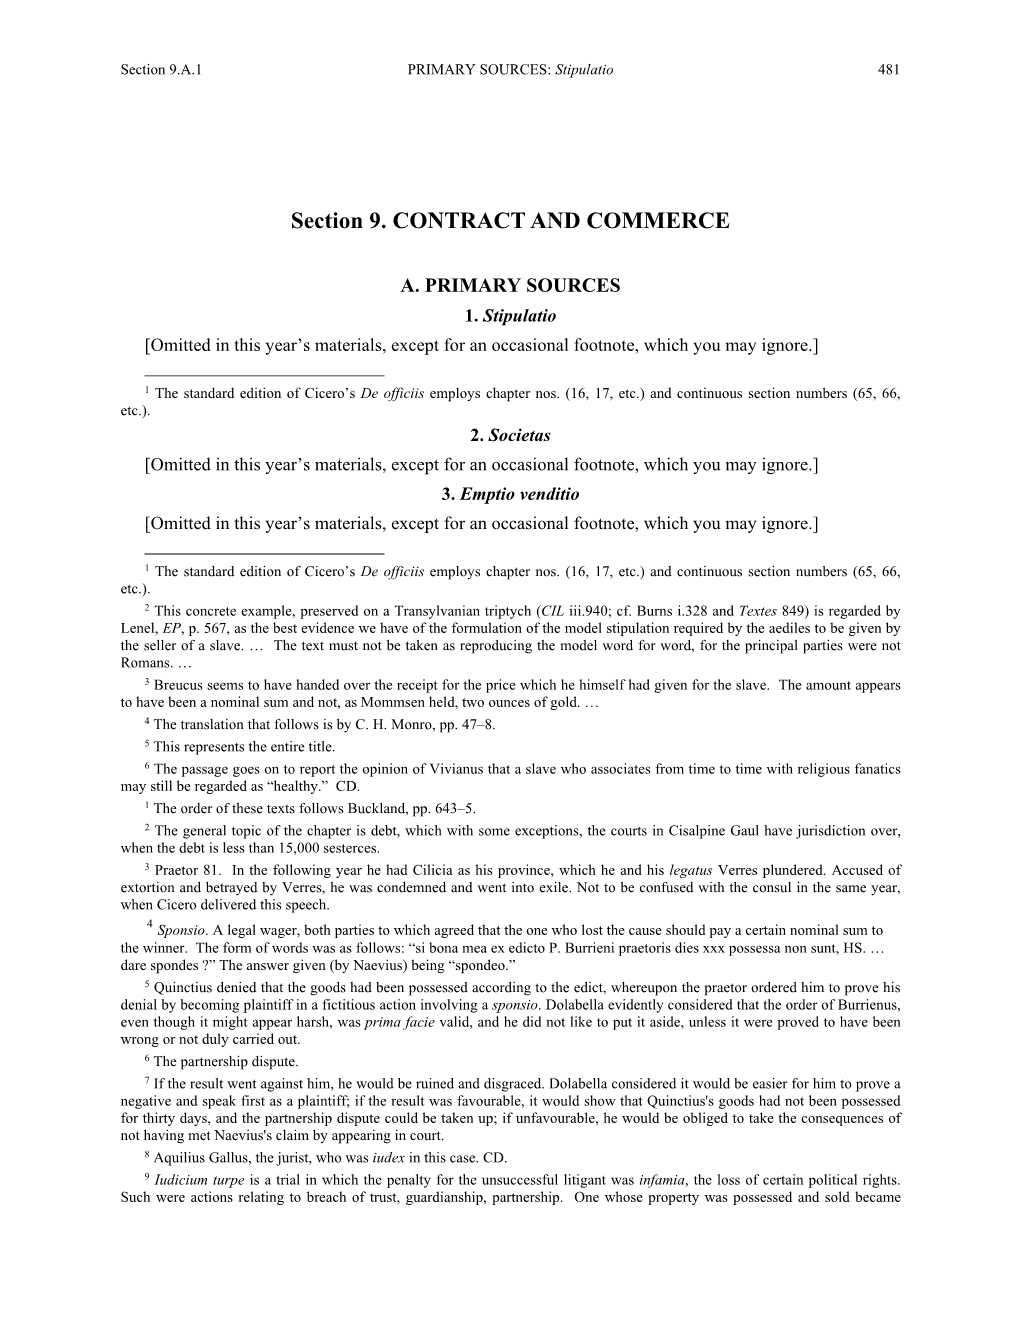 Section 9. CONTRACT and COMMERCE